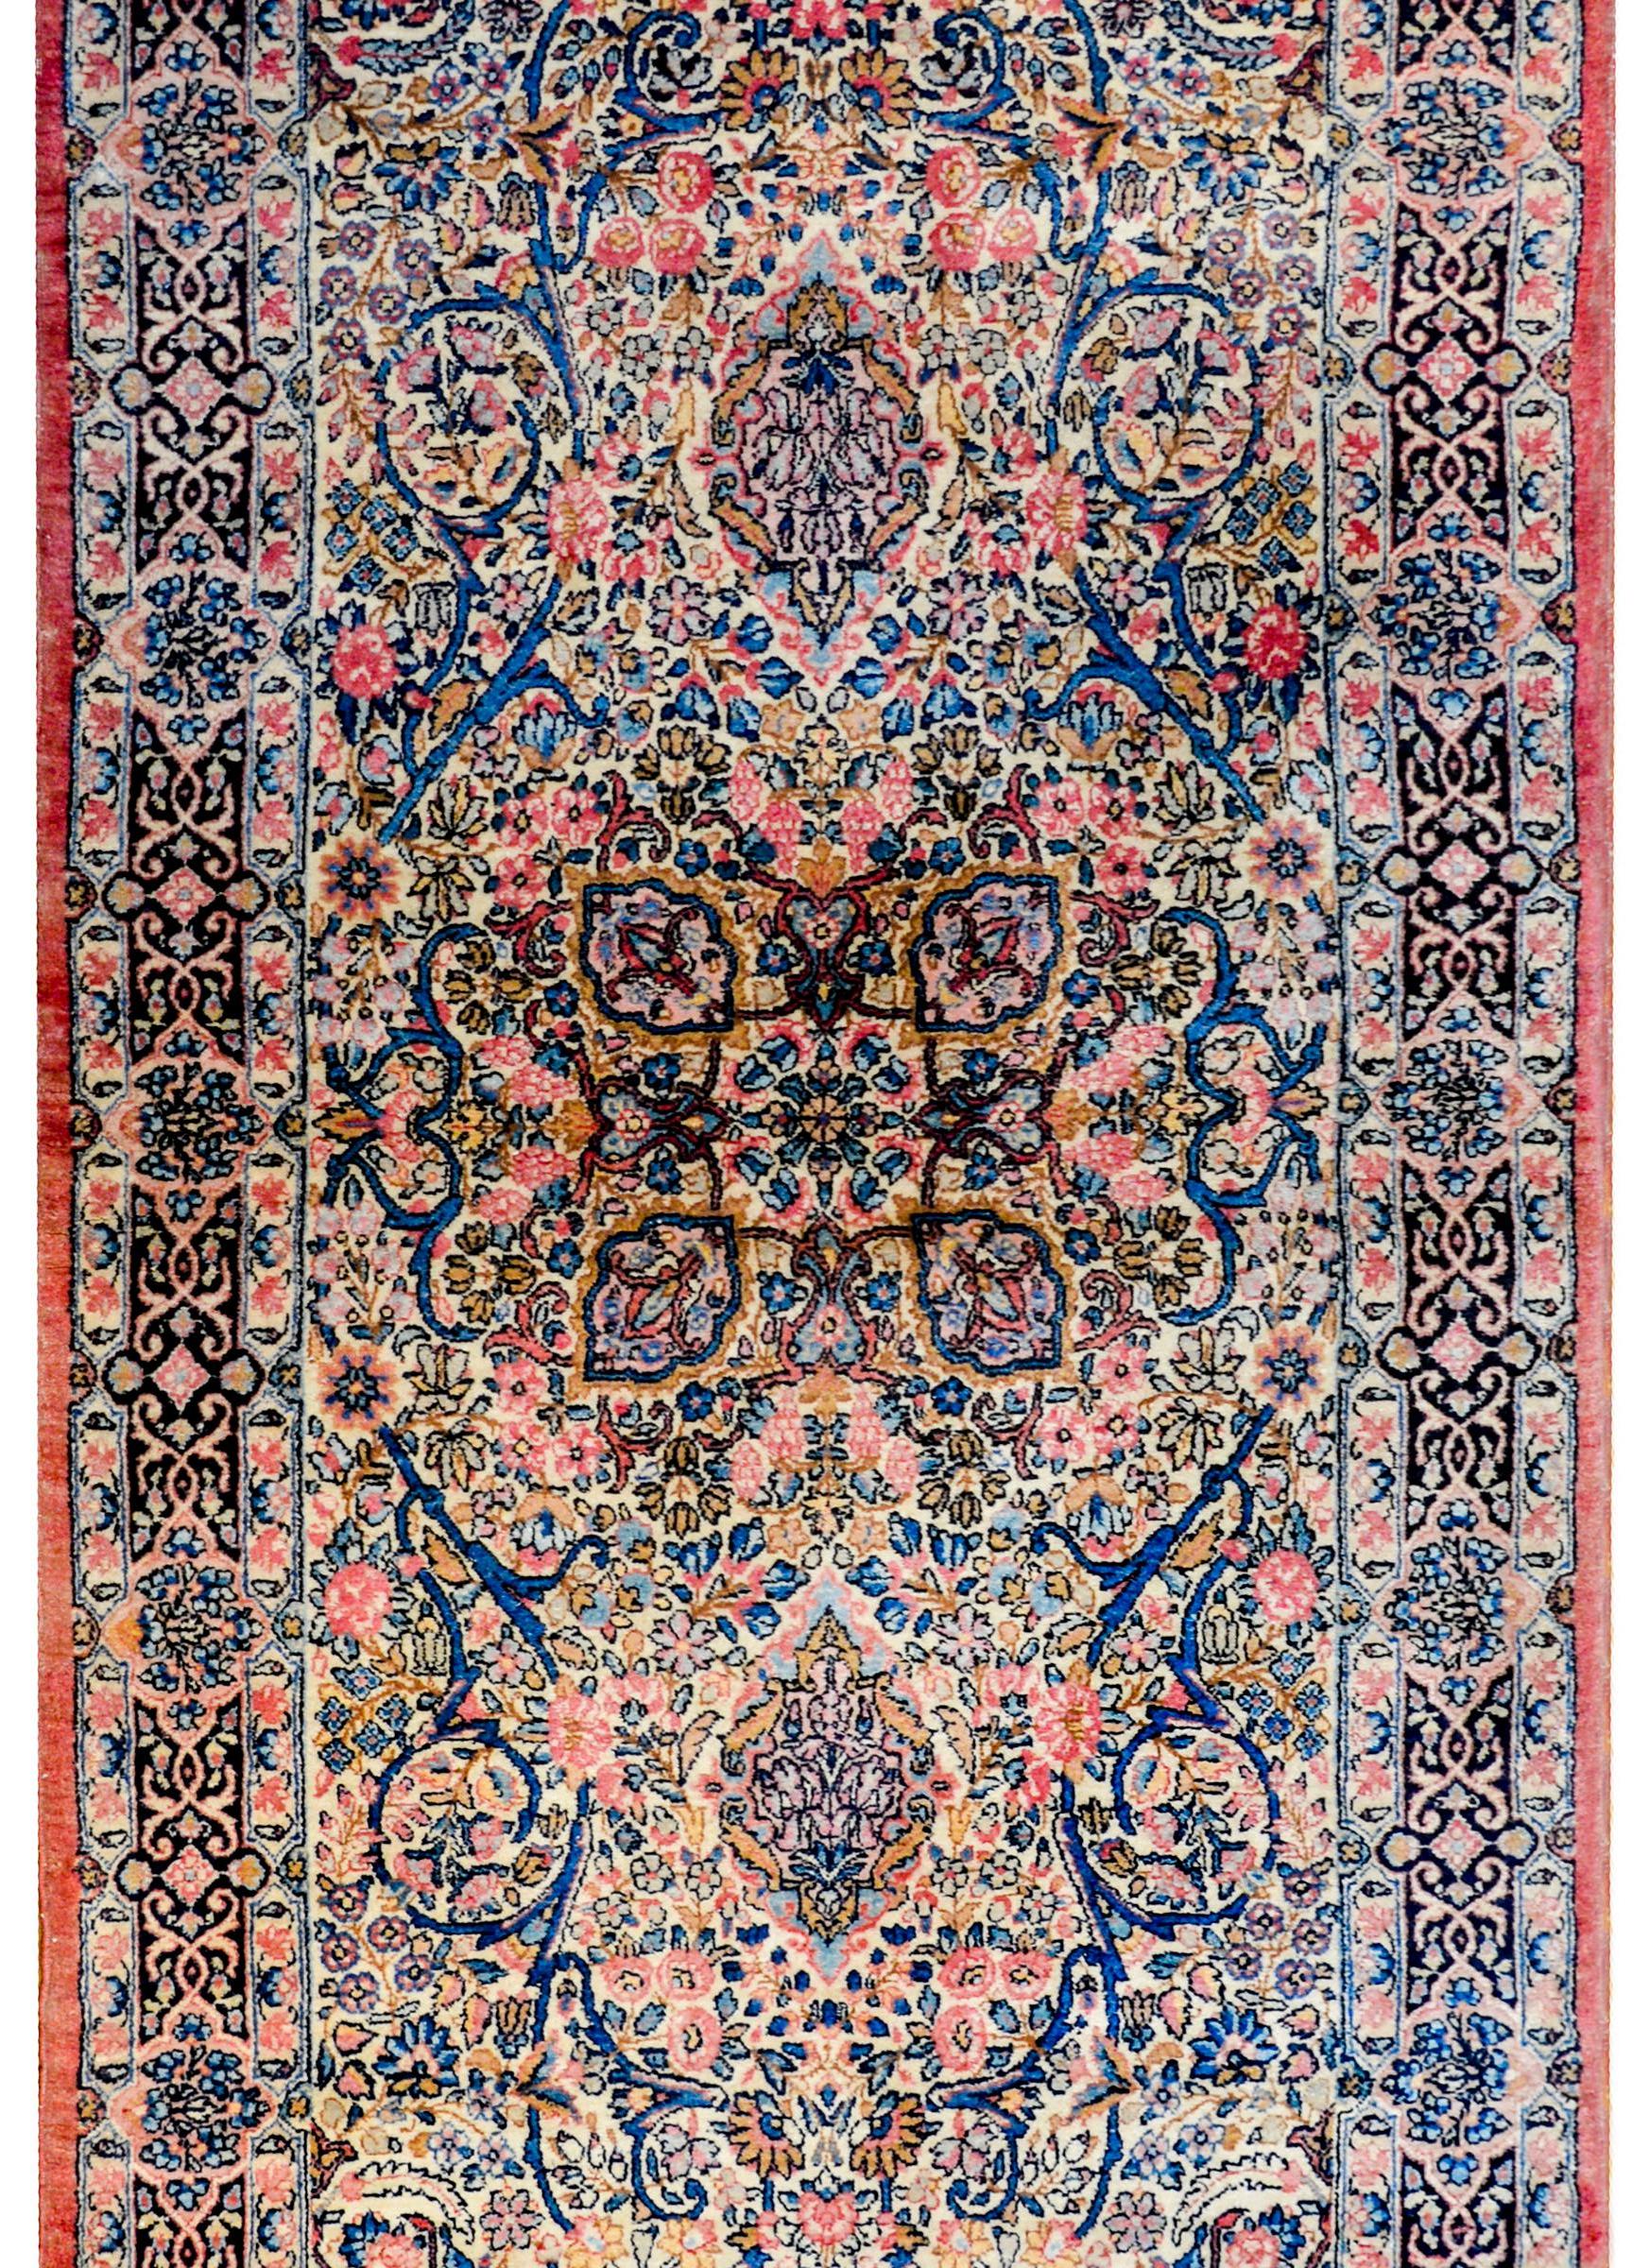 A wonderful early 20th century Persian Kirman rug with a densely woven mirrored scrolling vine and floral pattern woven in traditional Kirman colors of light and dark indigo, pink, and gold, on a cream colored background. The central medallion is a